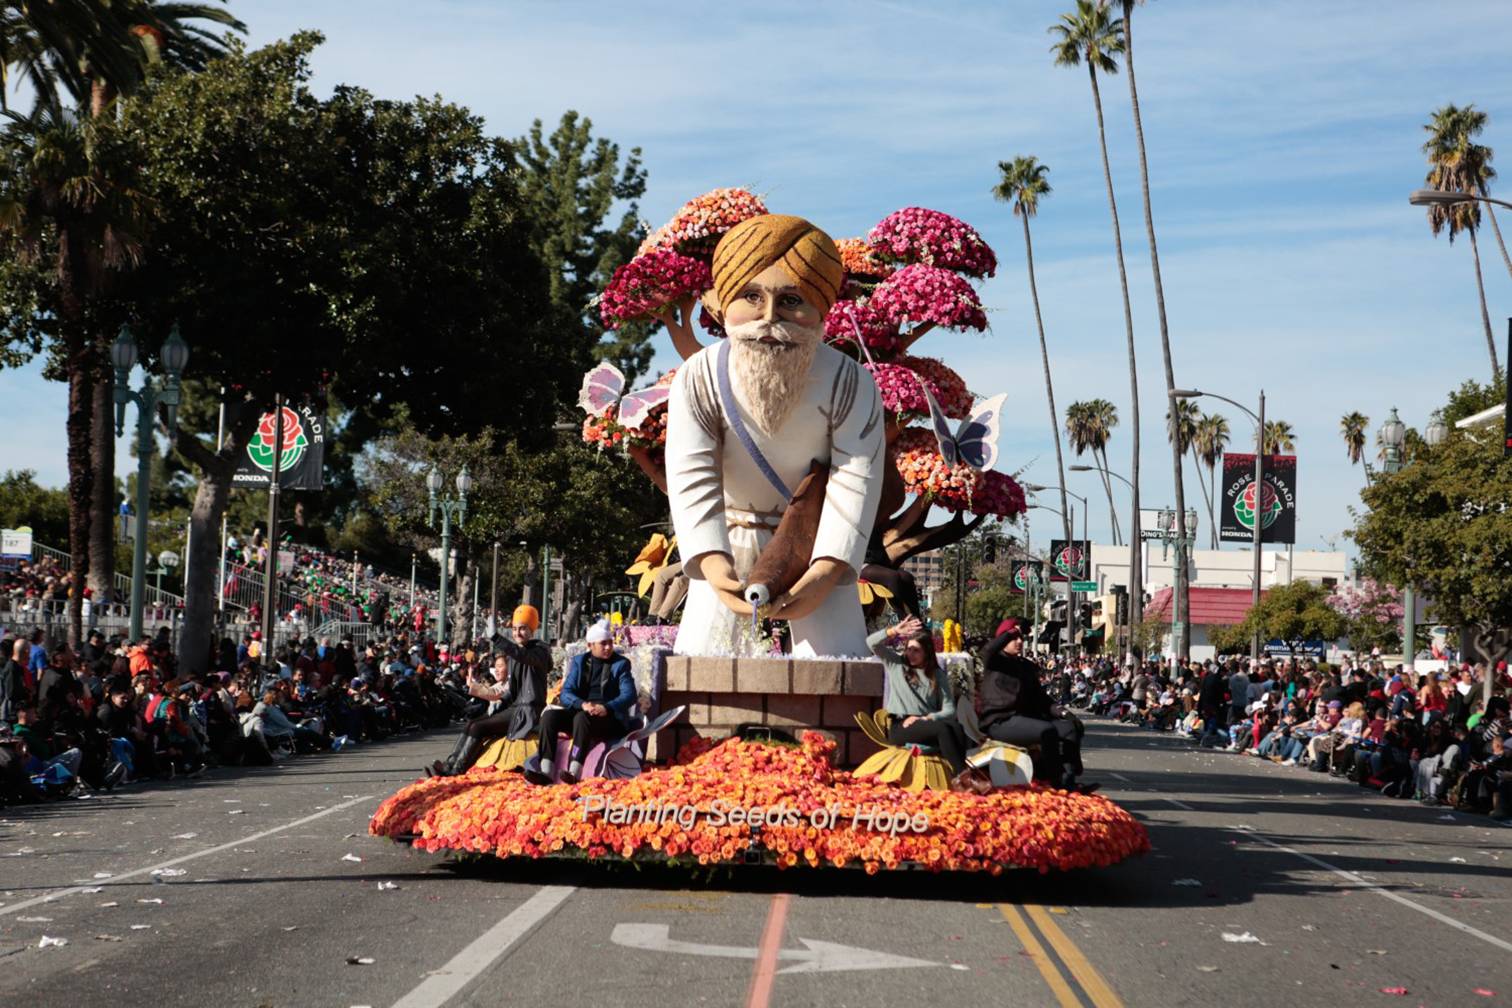 American Sikhs Shine At Rose Parade 2020 With A float That Sows Seeds Of hope, Generosity And Harmony